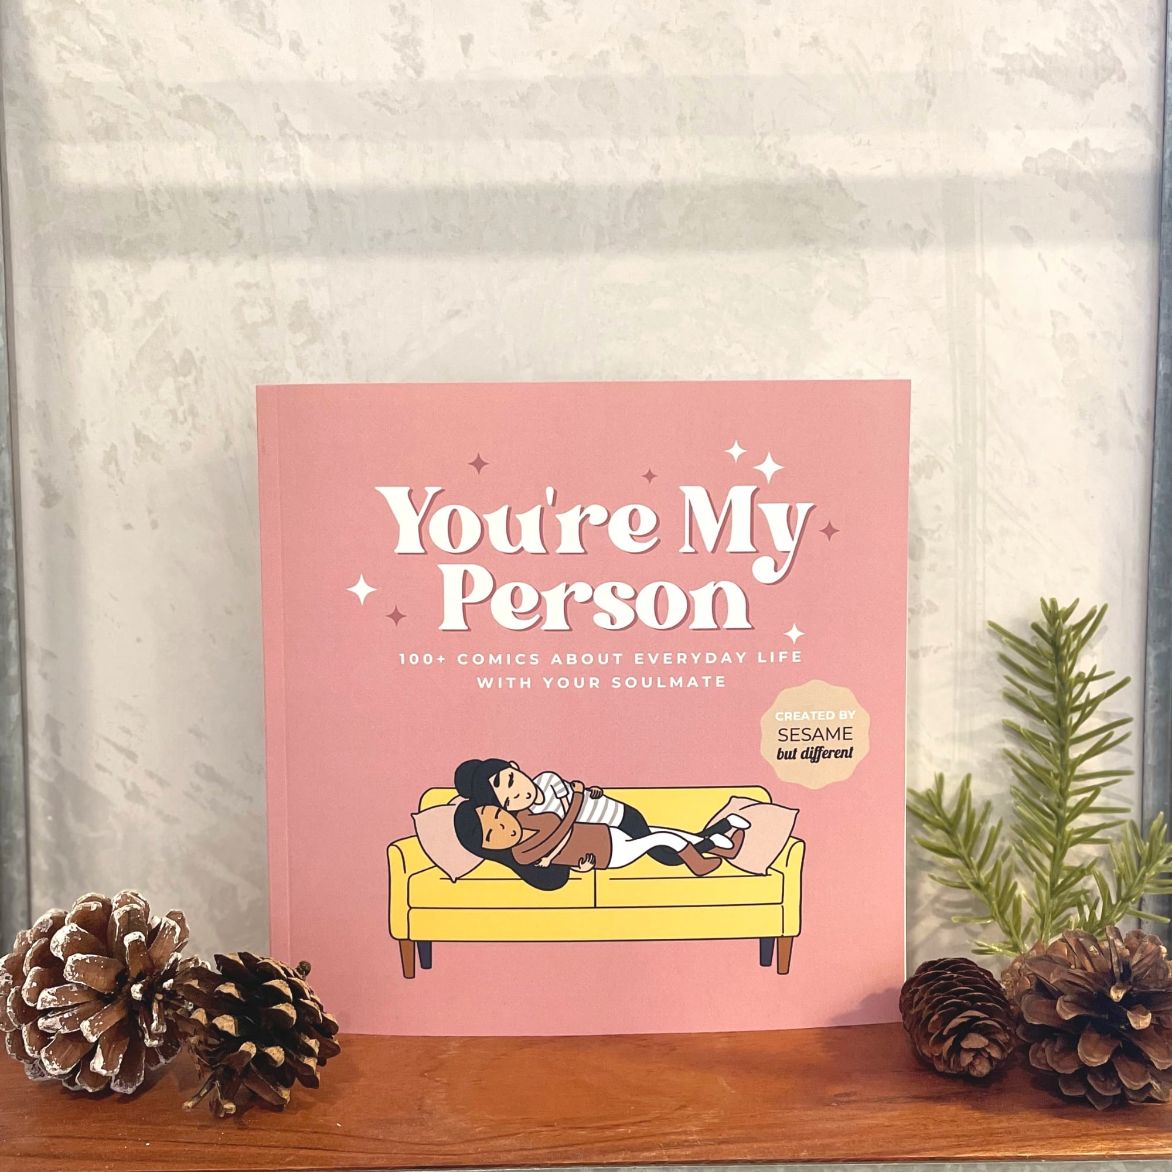 You're My Person | 100+ Comics About Everyday Life with Your Soulmate | Cute Lesbian Comic Book